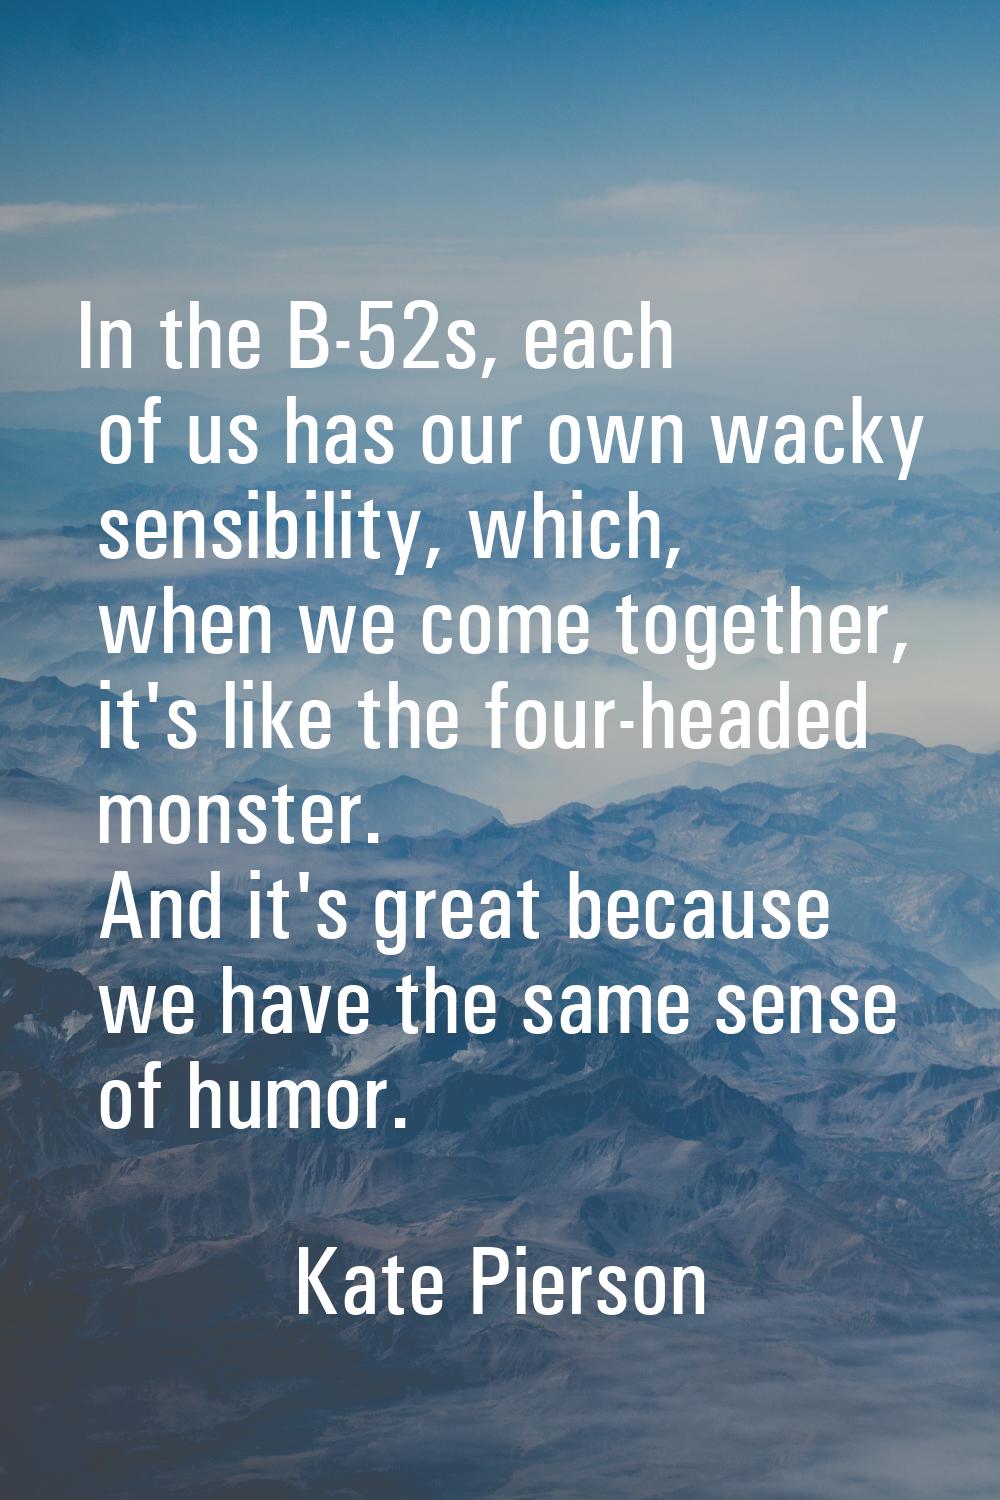 In the B-52s, each of us has our own wacky sensibility, which, when we come together, it's like the